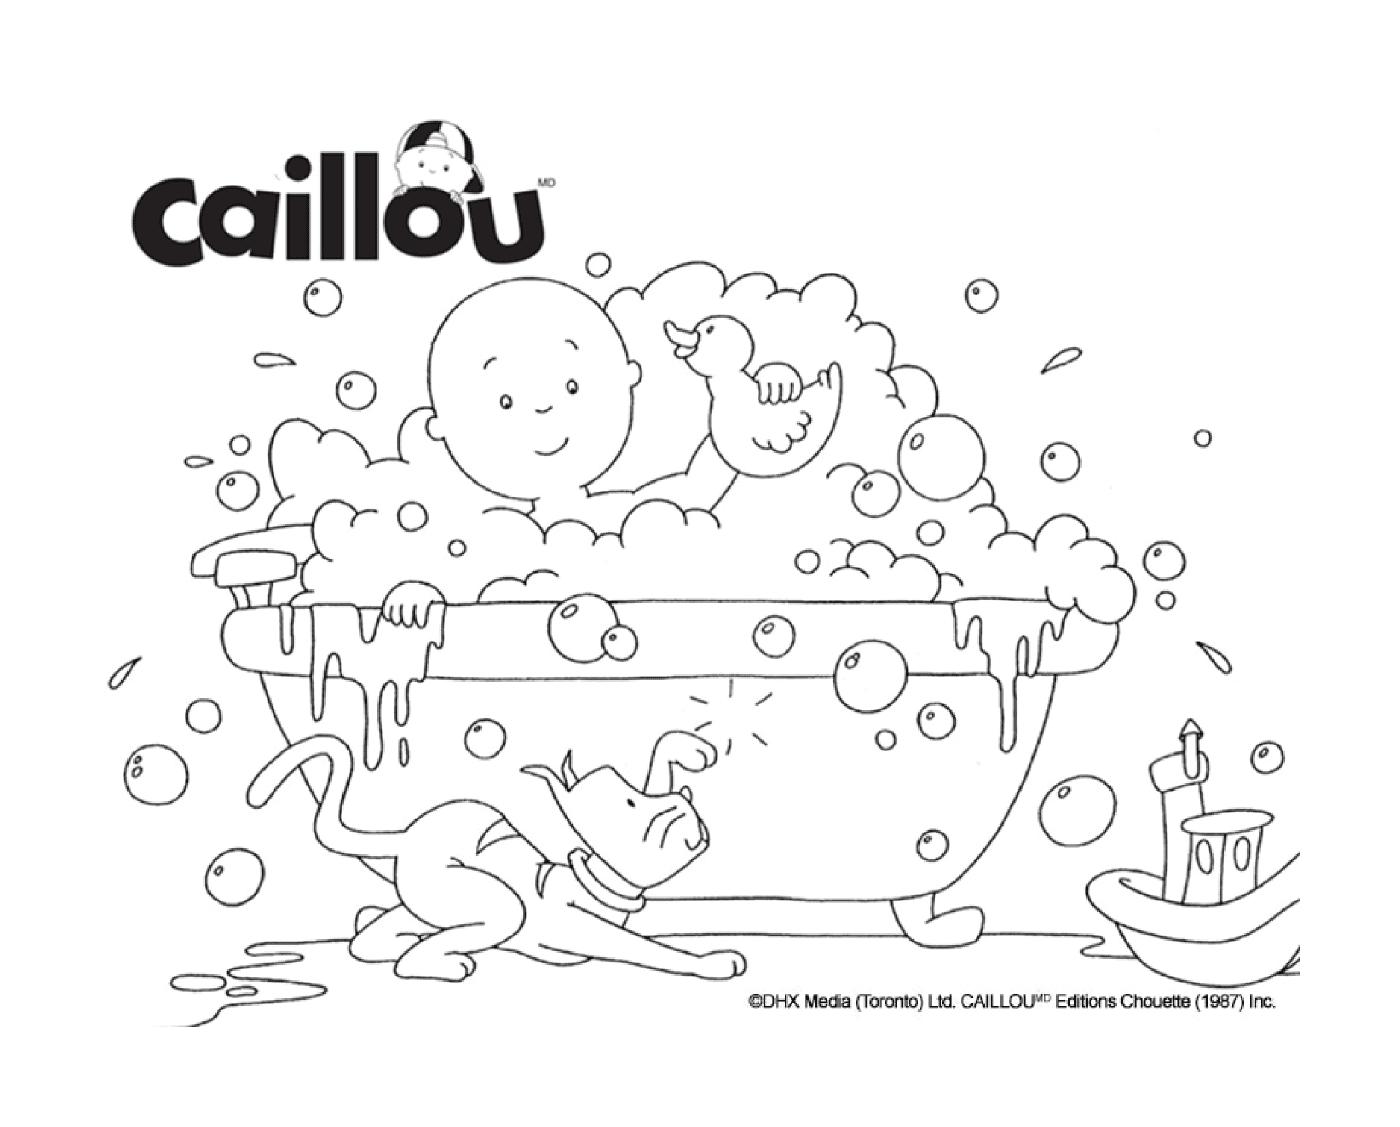  A foaming bath with Caillou and his toys 